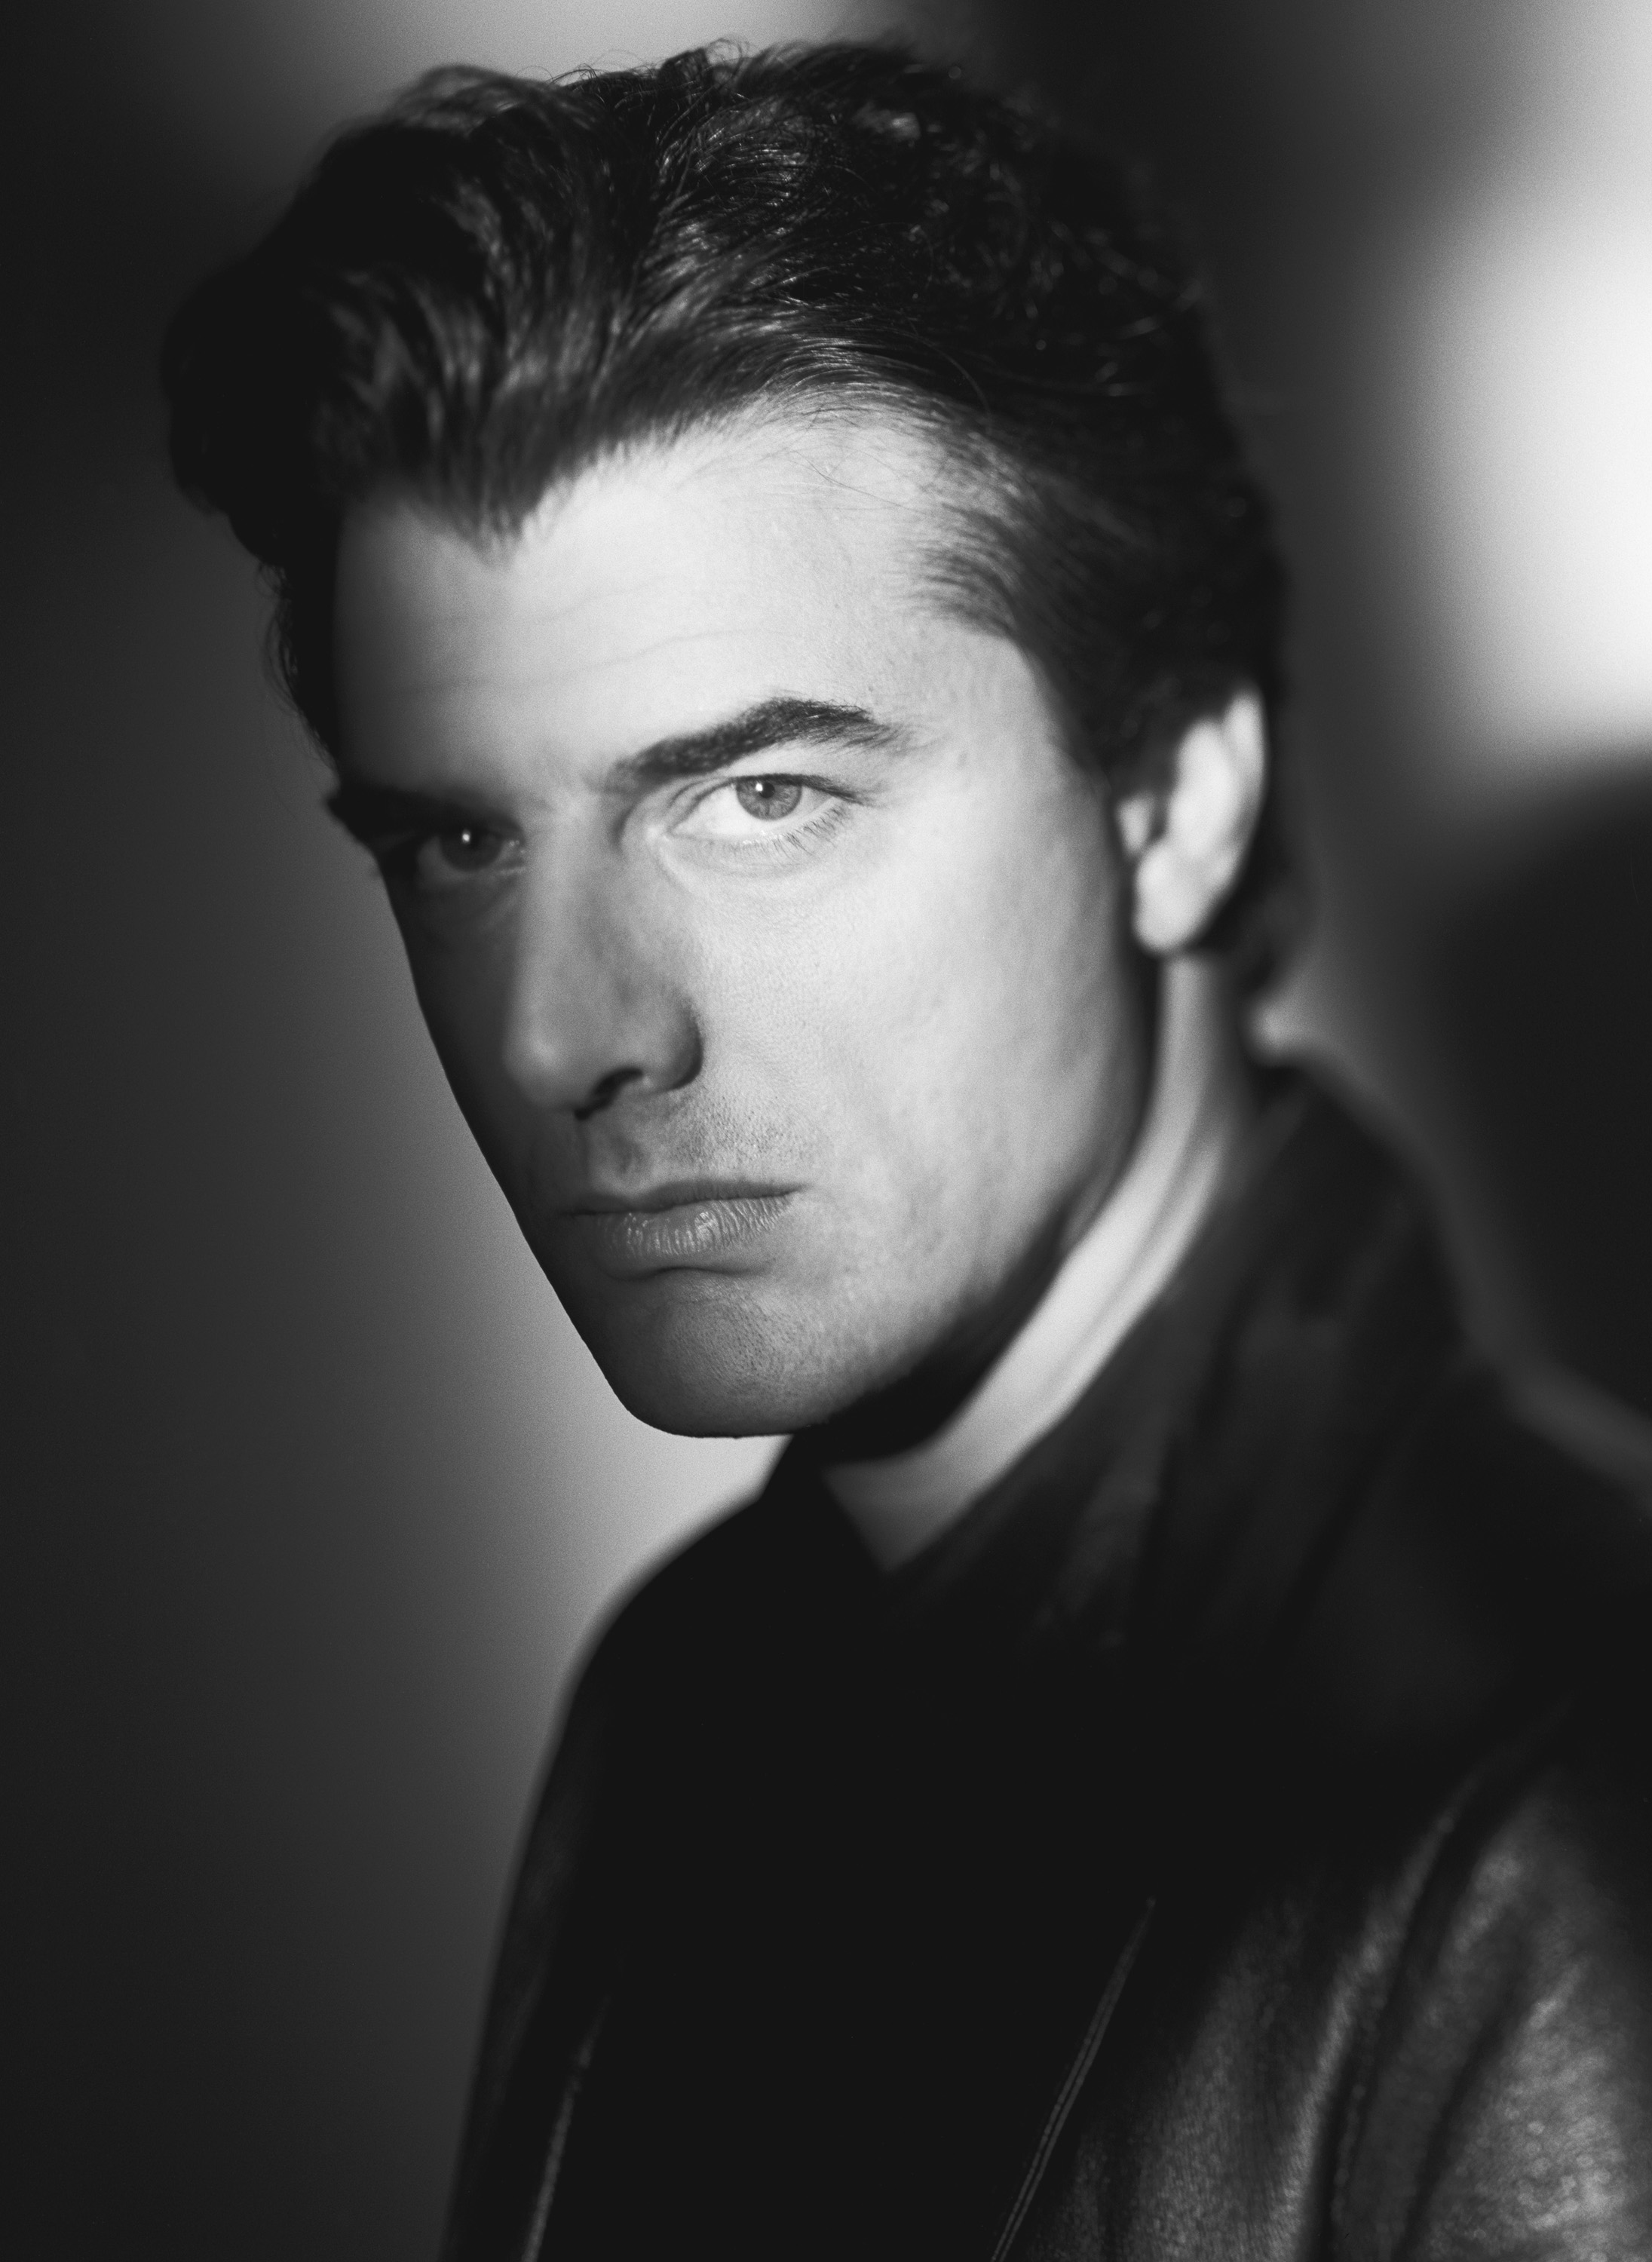 Chris Noth as Detective Mike Logan in "Law and Order" | Source: Getty Images